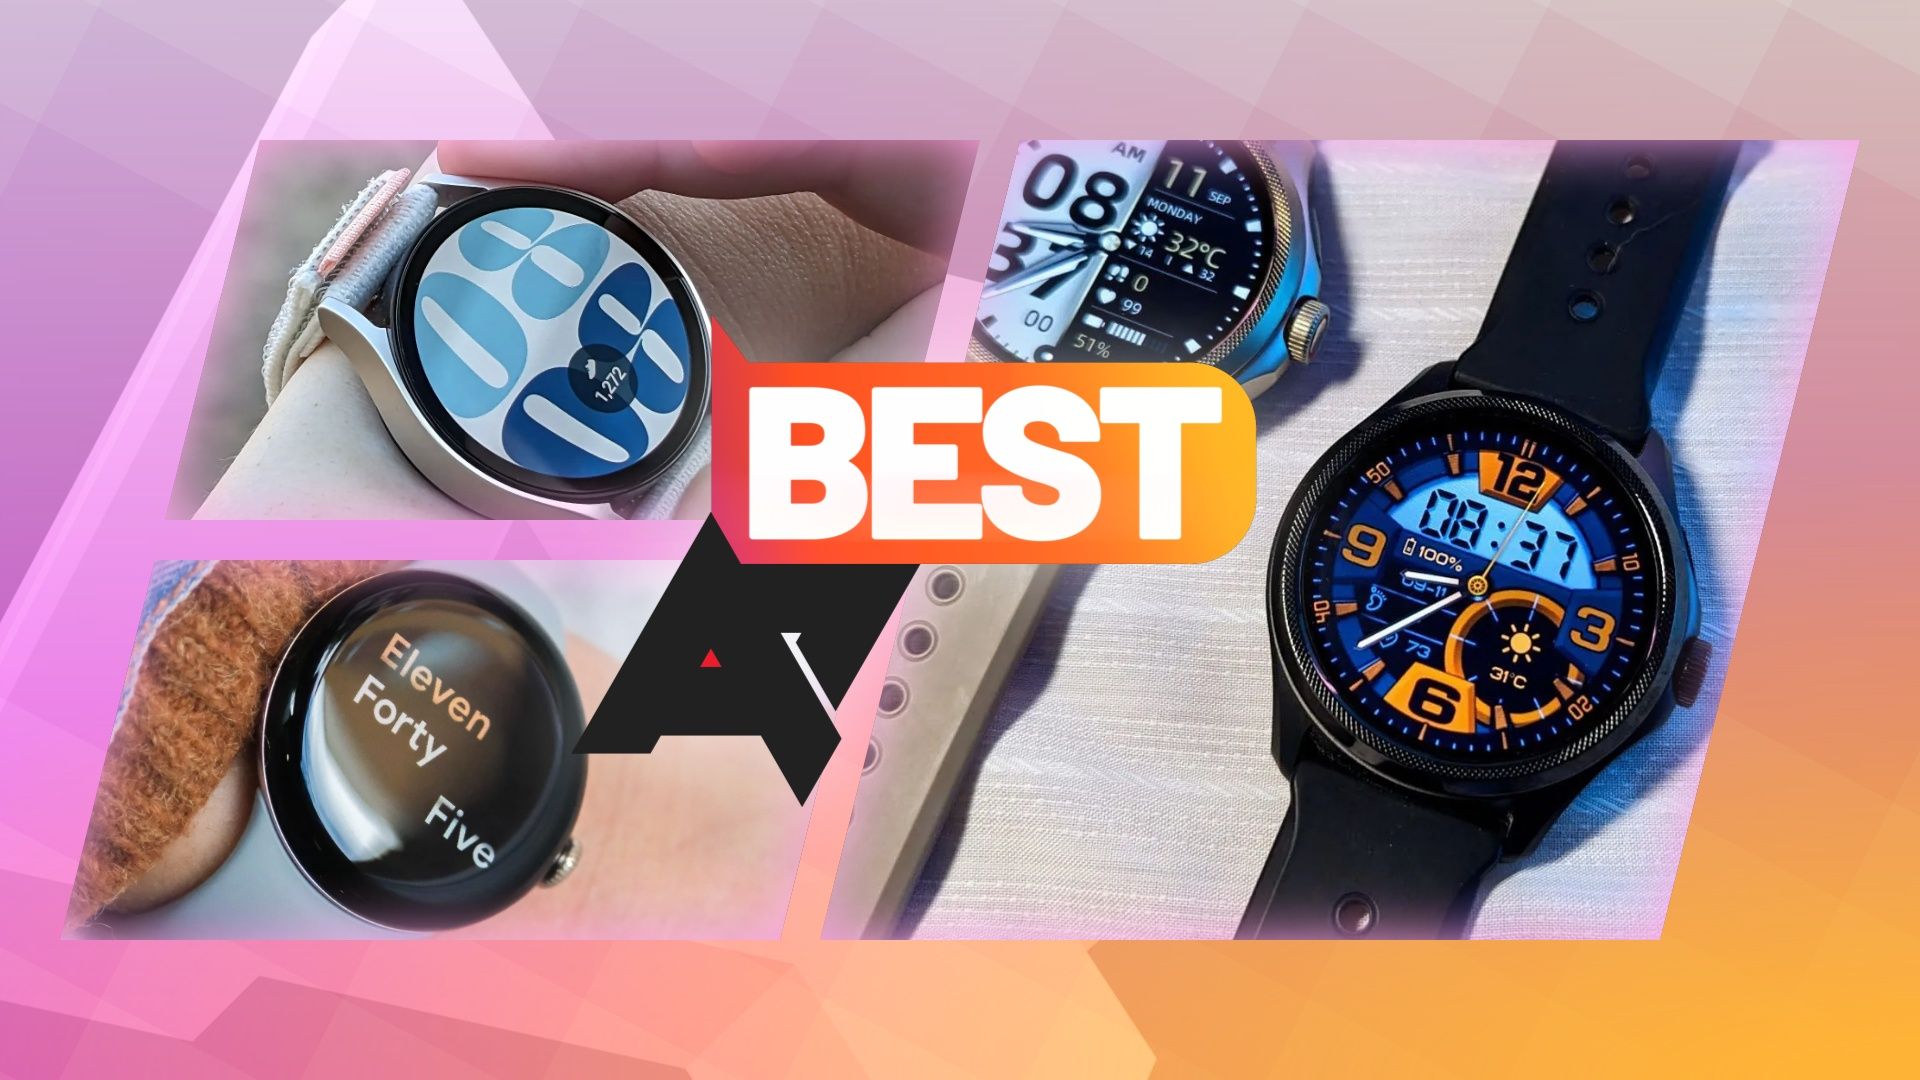 A collection of the best Android smartwatches